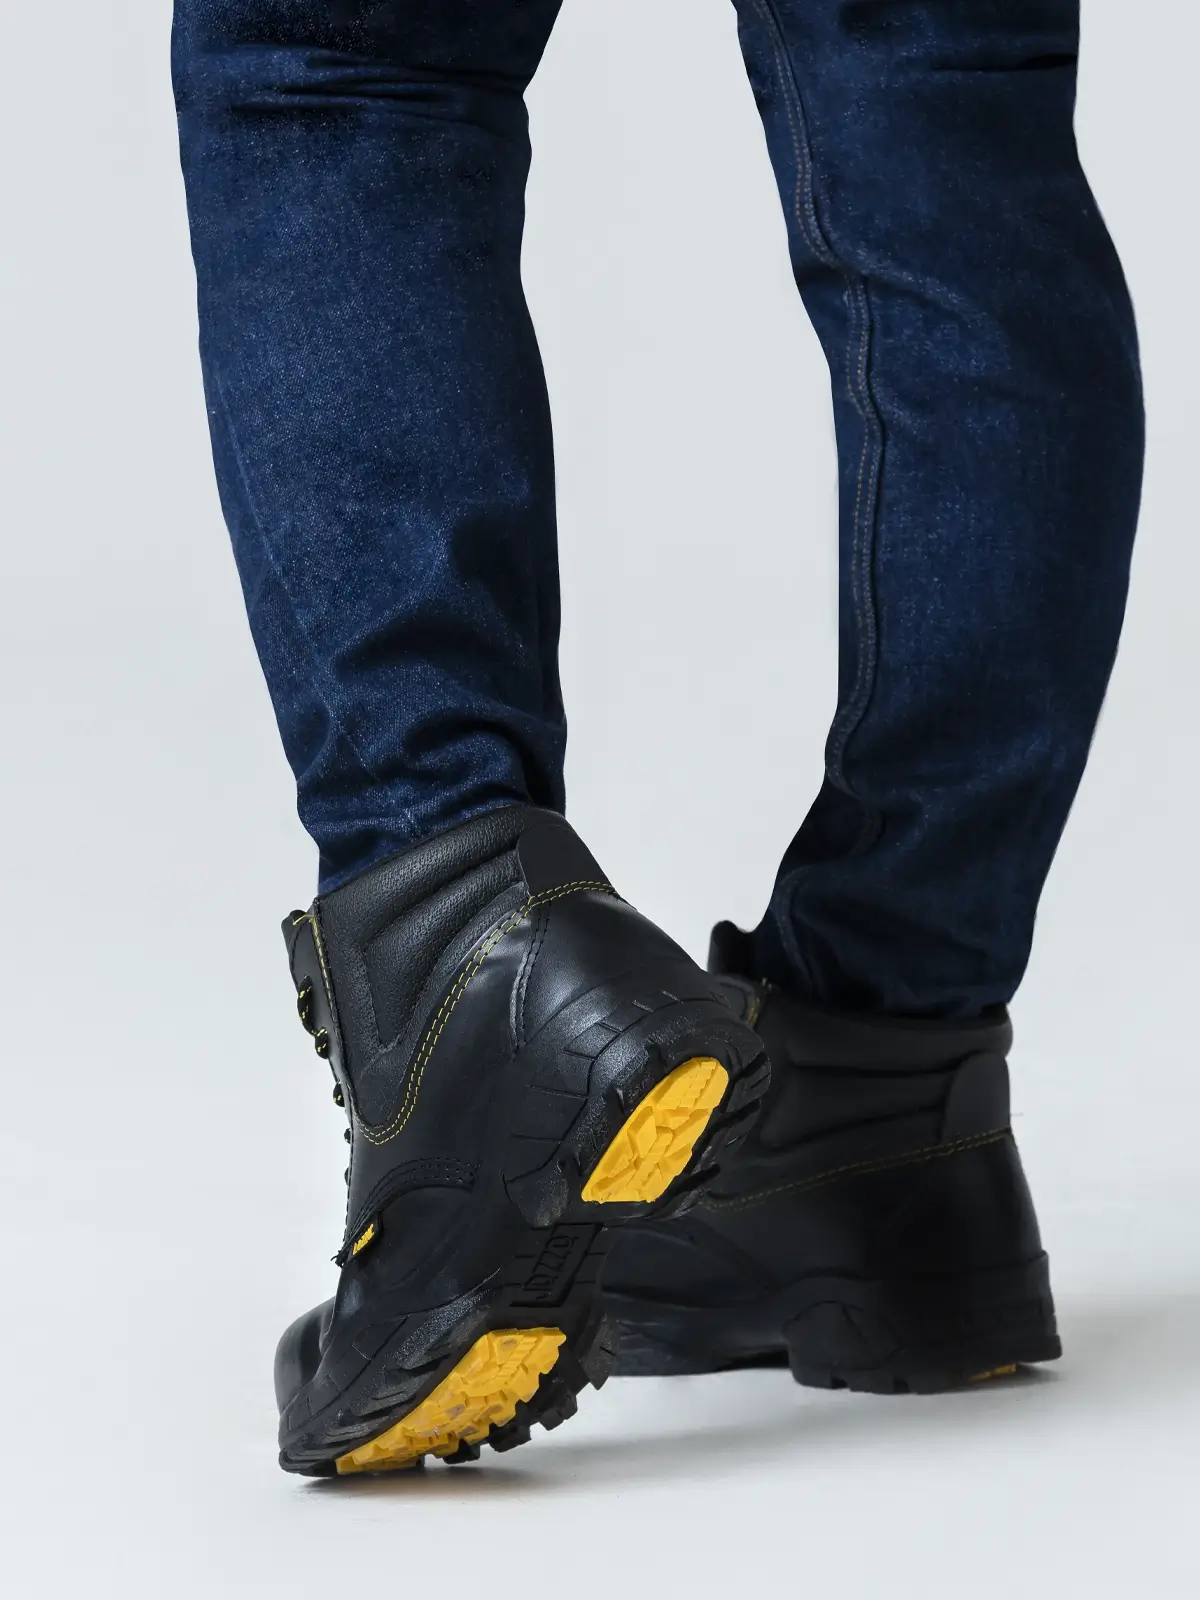 black dielectric work boot